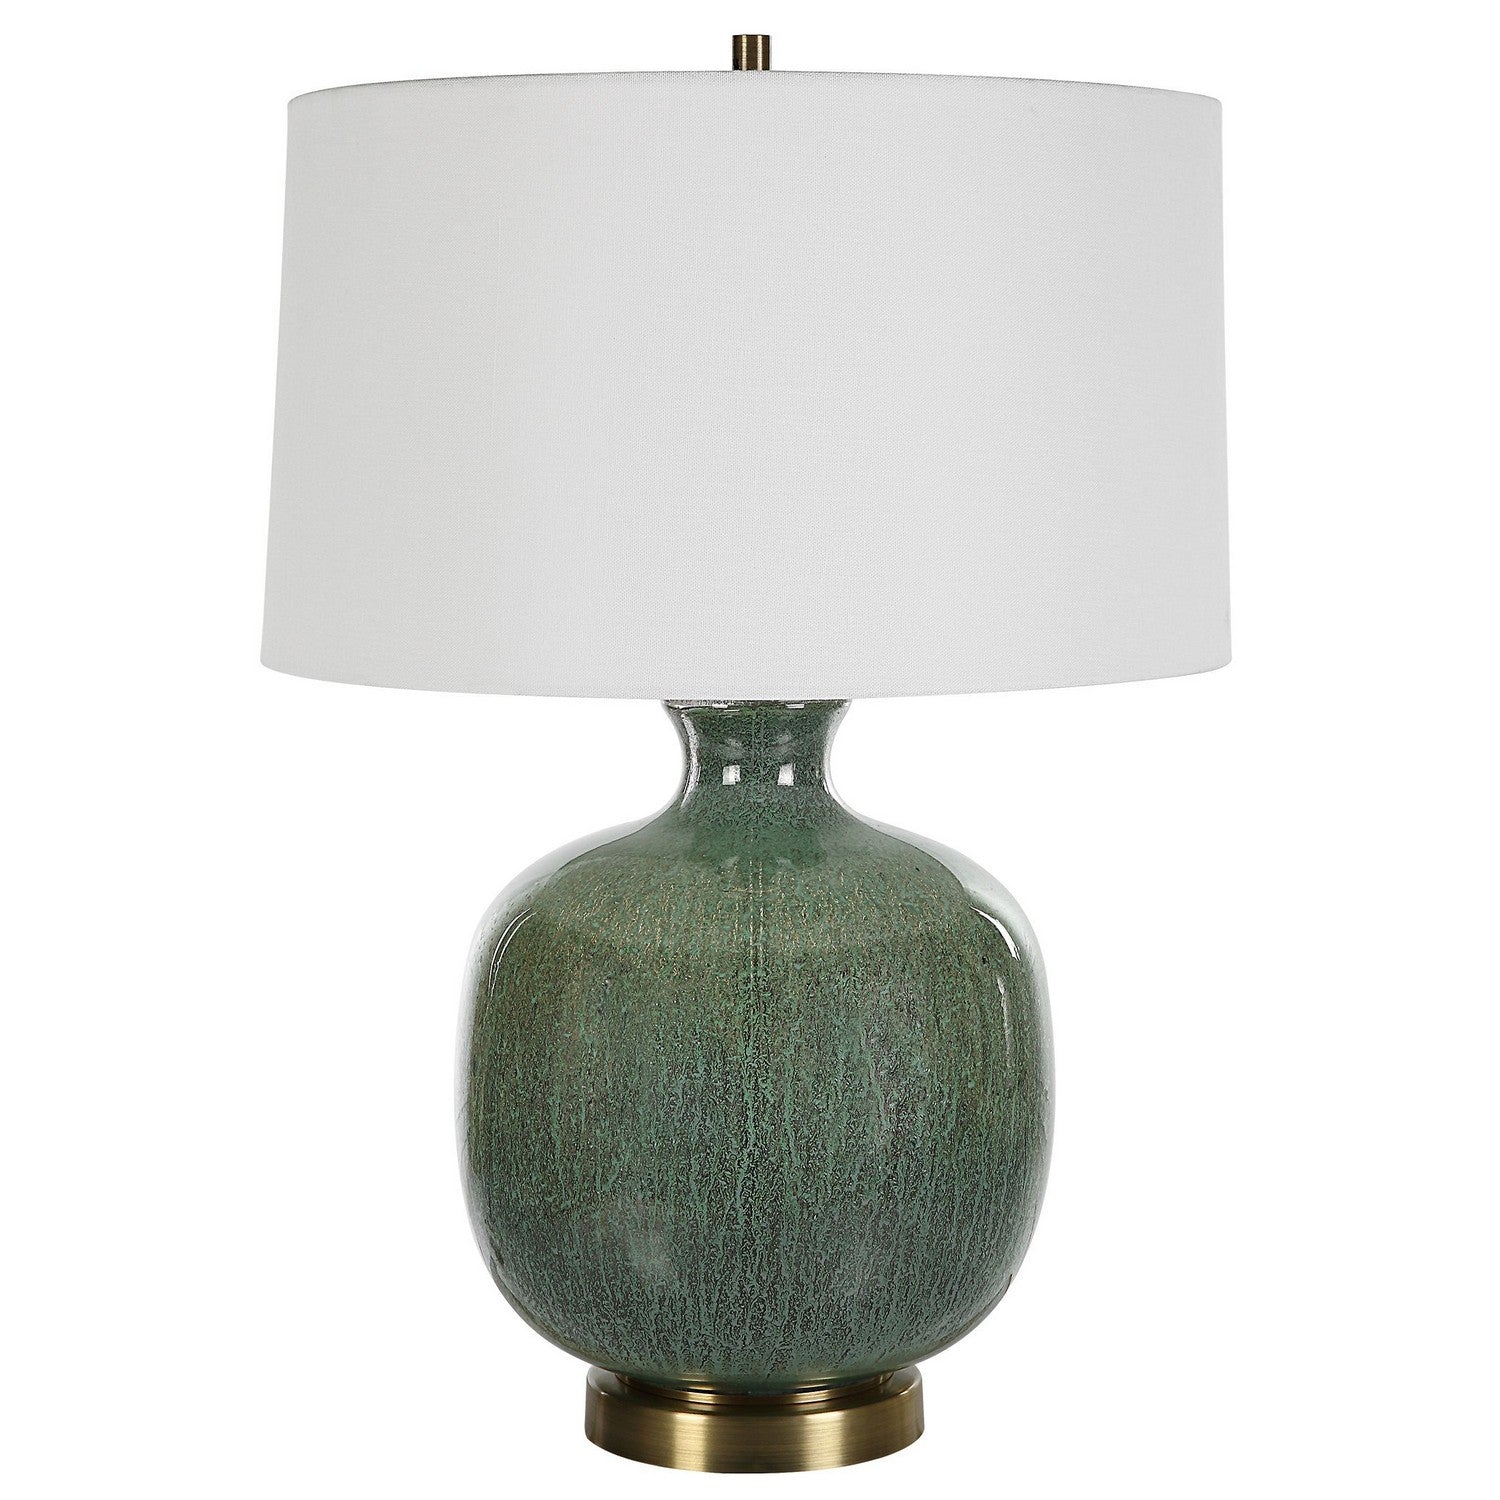 Uttermost - 30238-1 - One Light Table Lamp - Nataly - Antique Brass